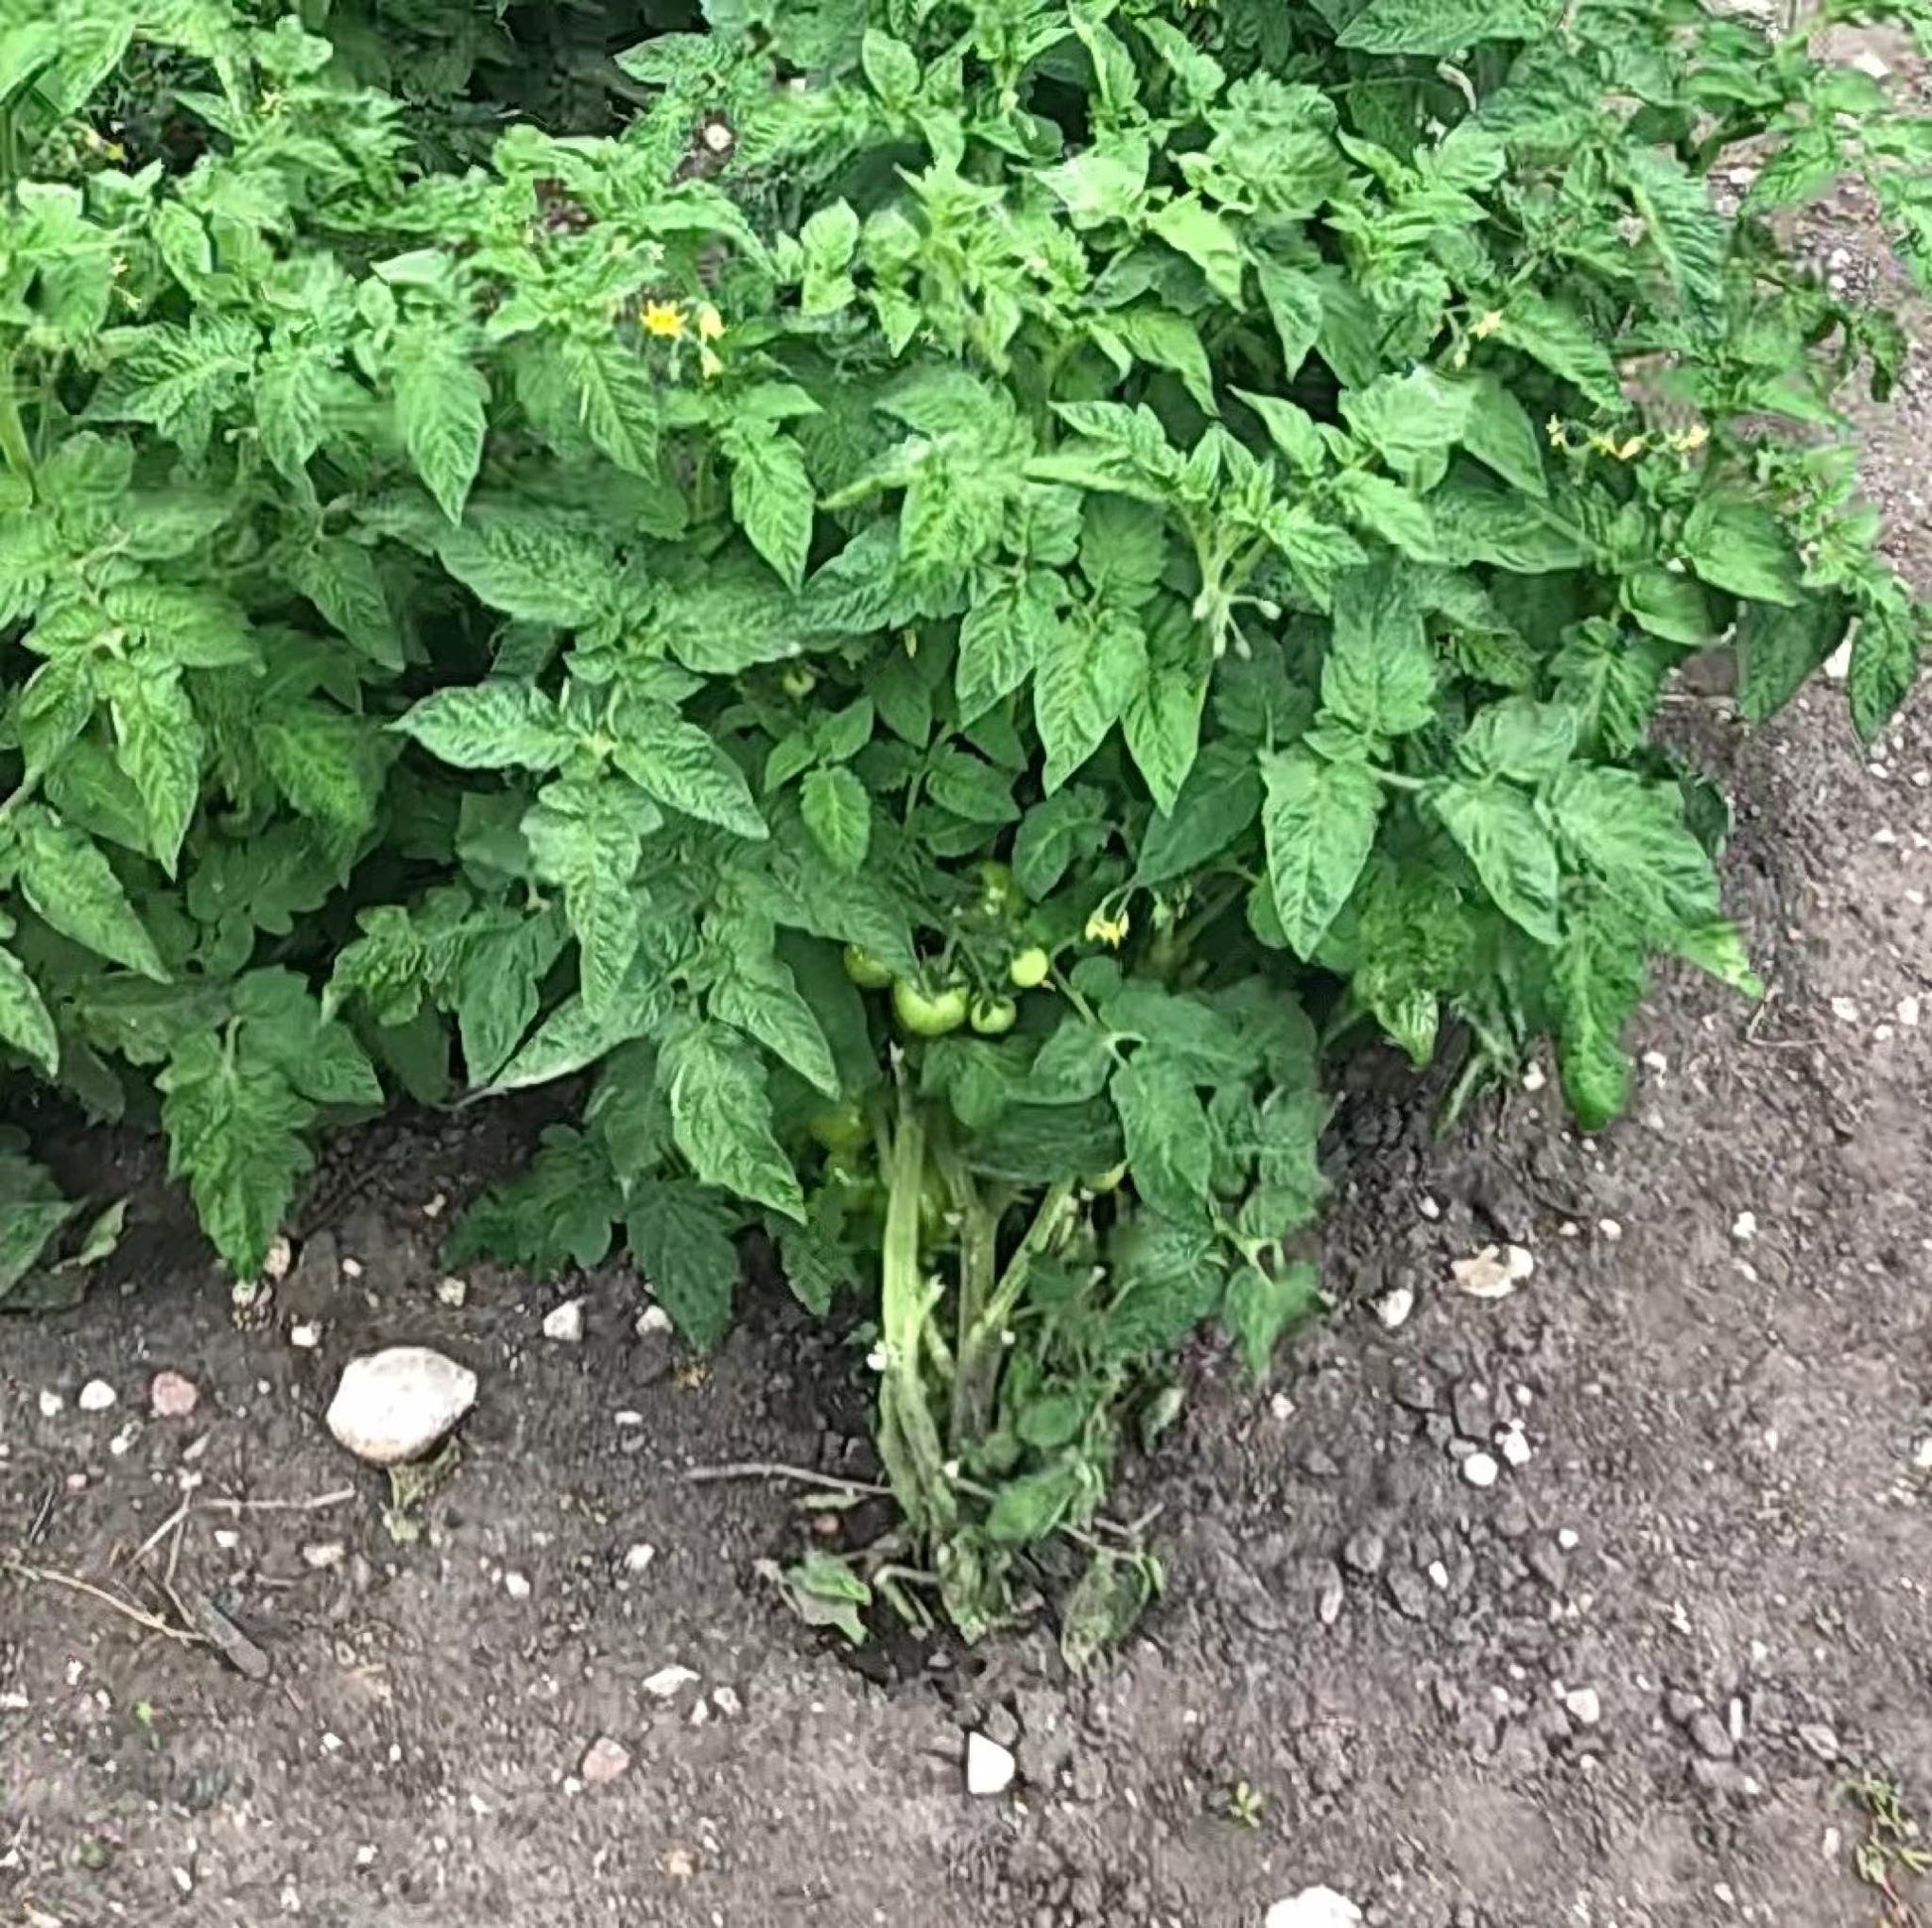 Sturdy looking dwarf tomato plant with a few green tomatoes.